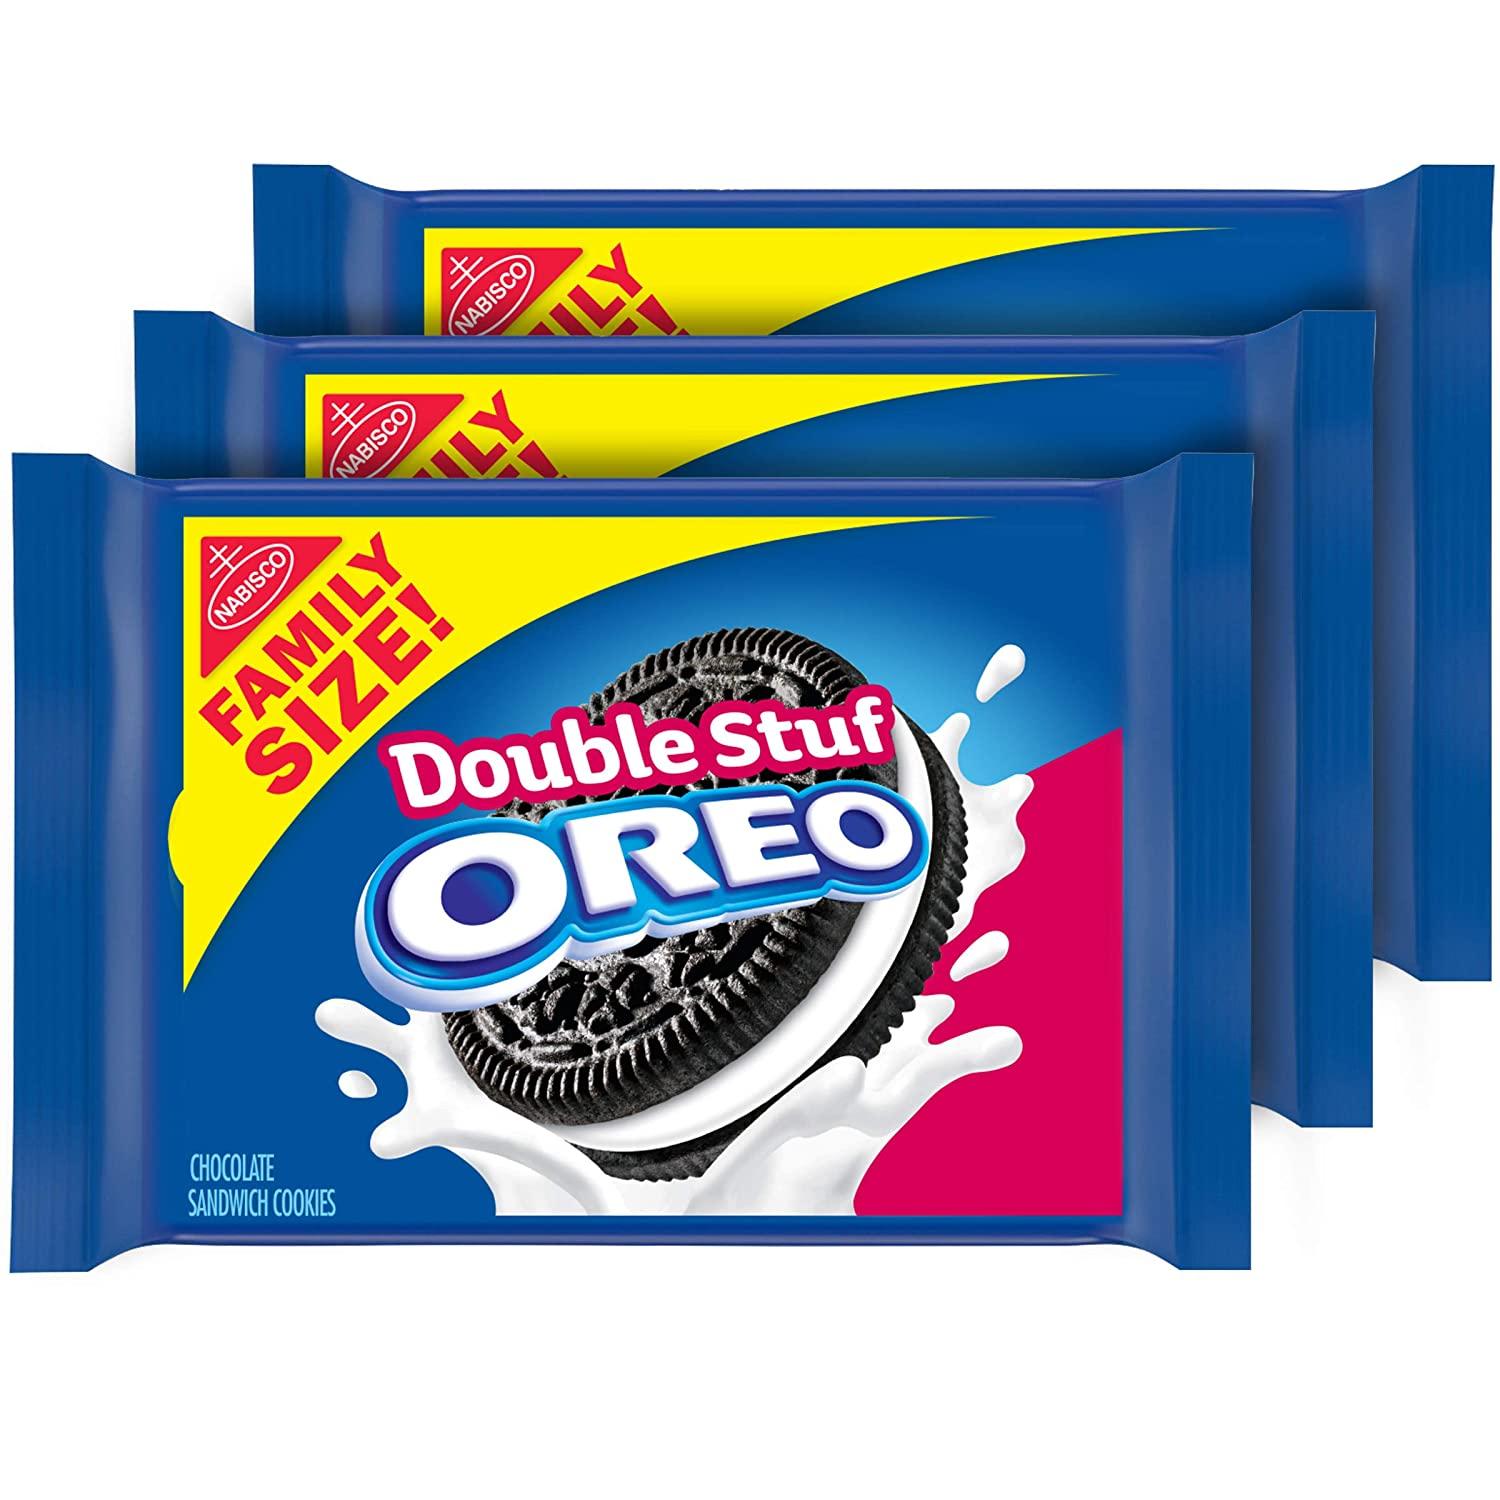 3 Oreo Family Size Chocolate Sandwich Cookies for $8.47 Shipped